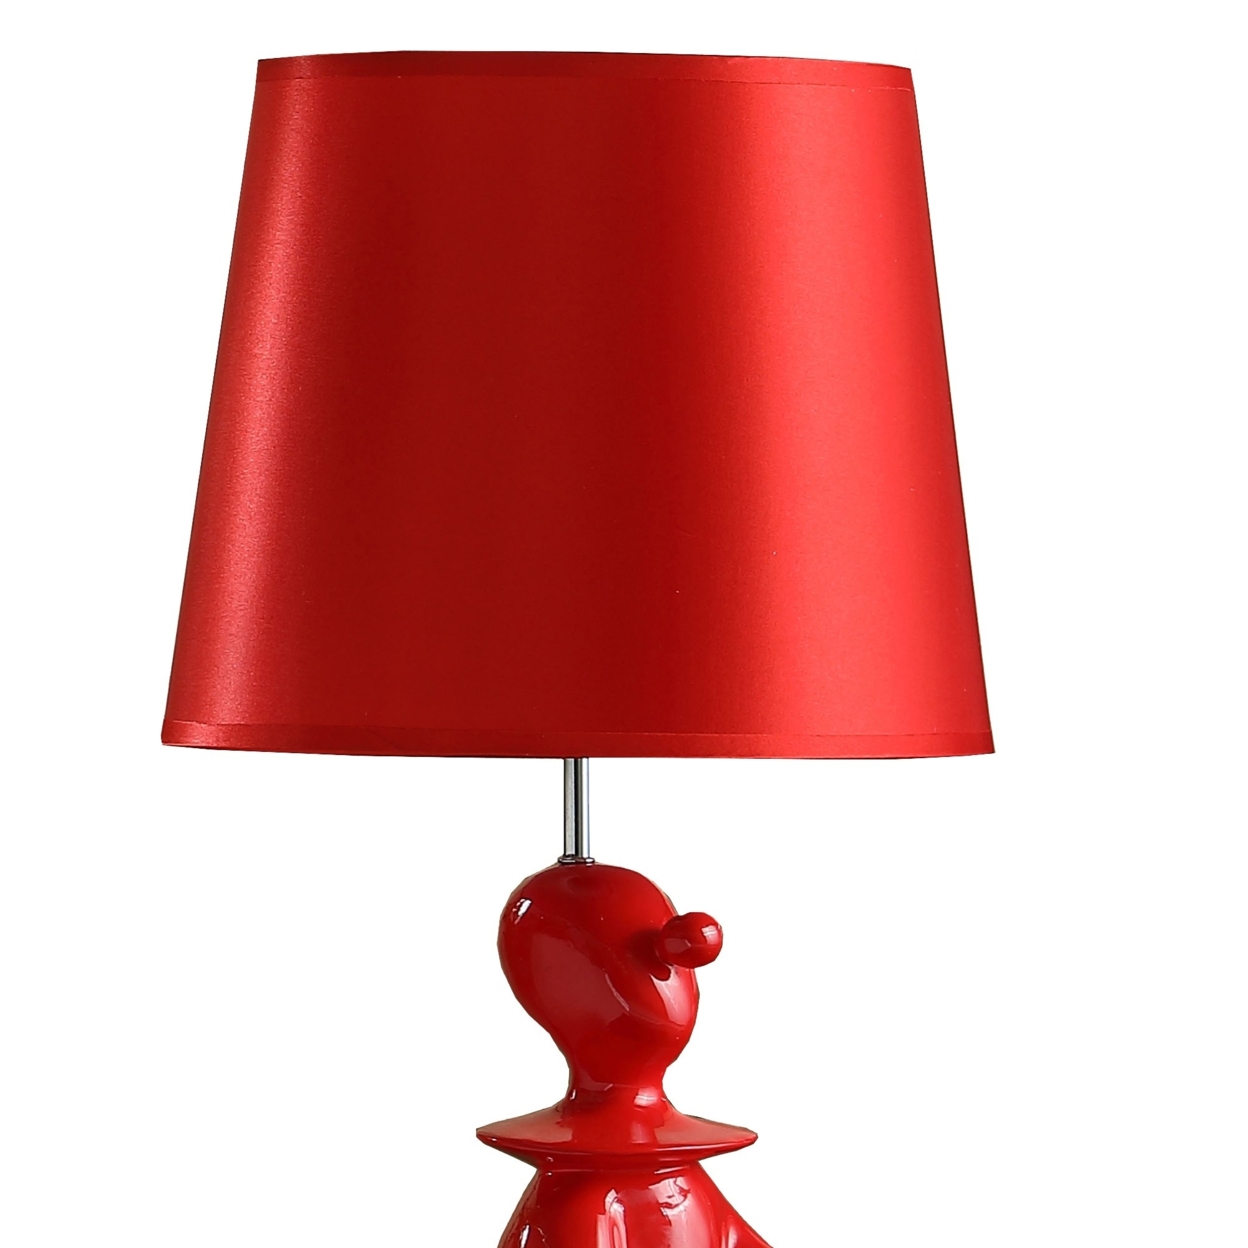 Fabric Shade Table Lamp With Polyresin Sitting Clown Base, Red- Saltoro Sherpi